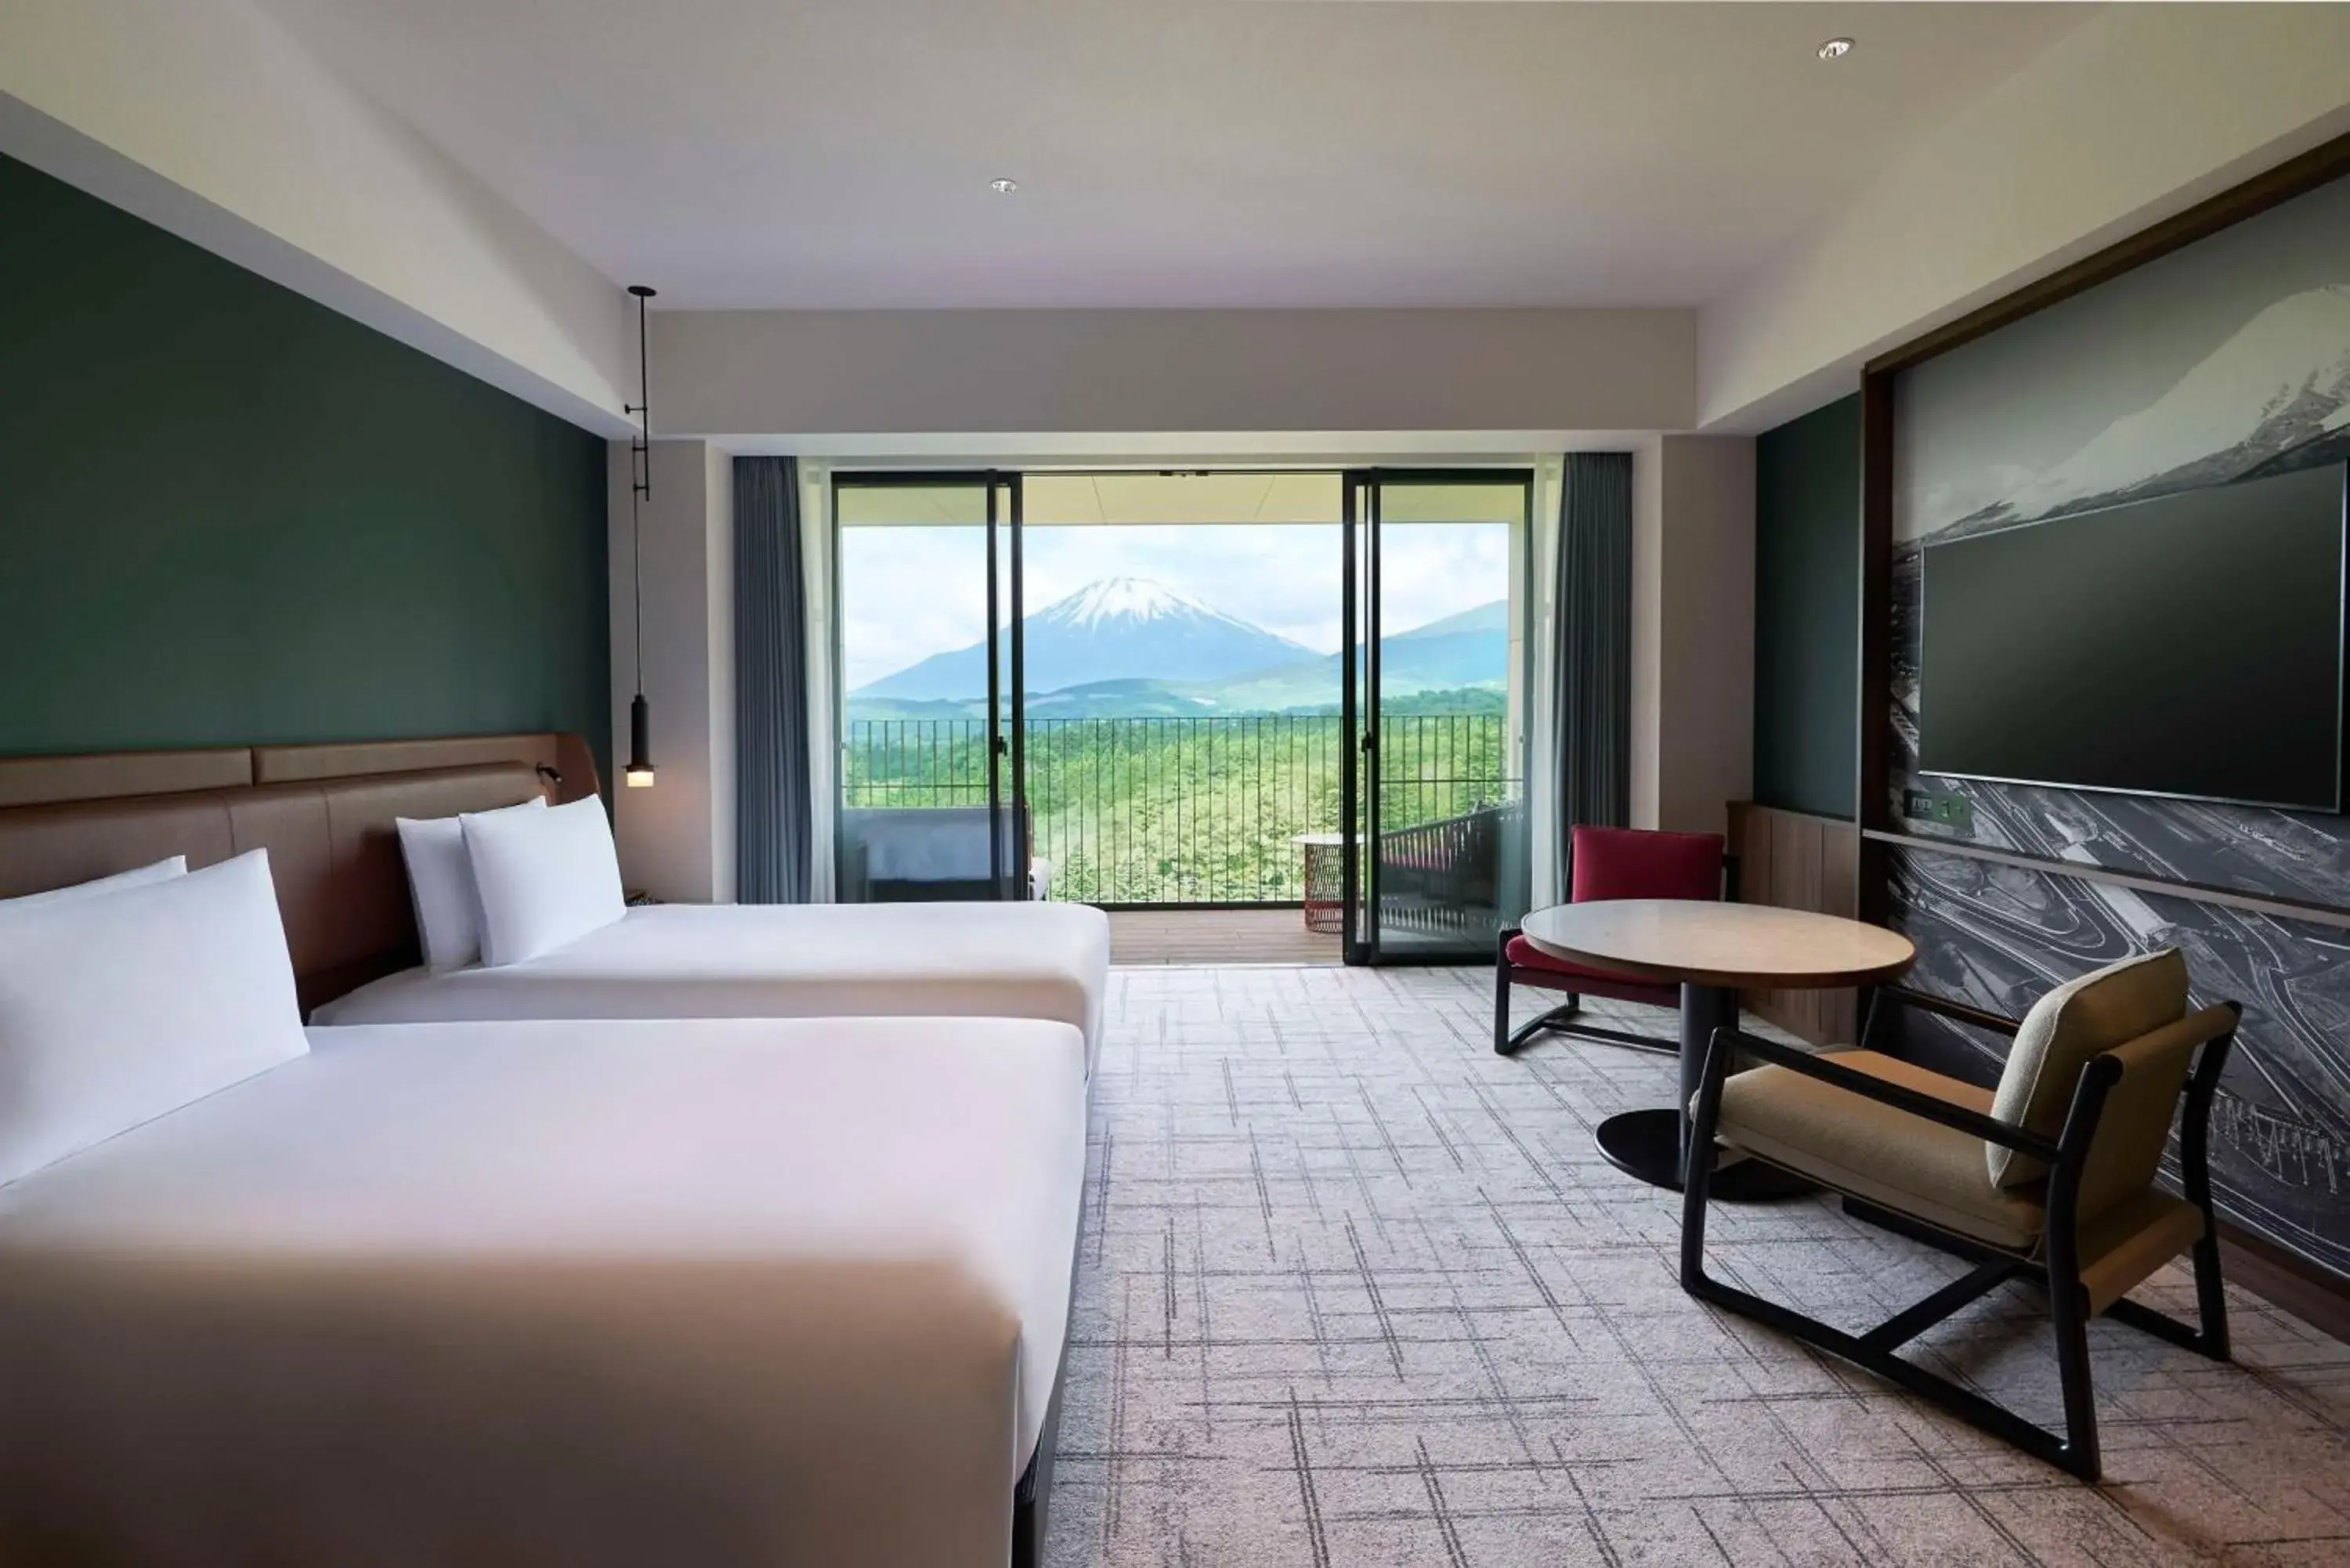 Bedroom, Mountain View in Fuji Speedway Hotel, Unbound Collection by Hyatt